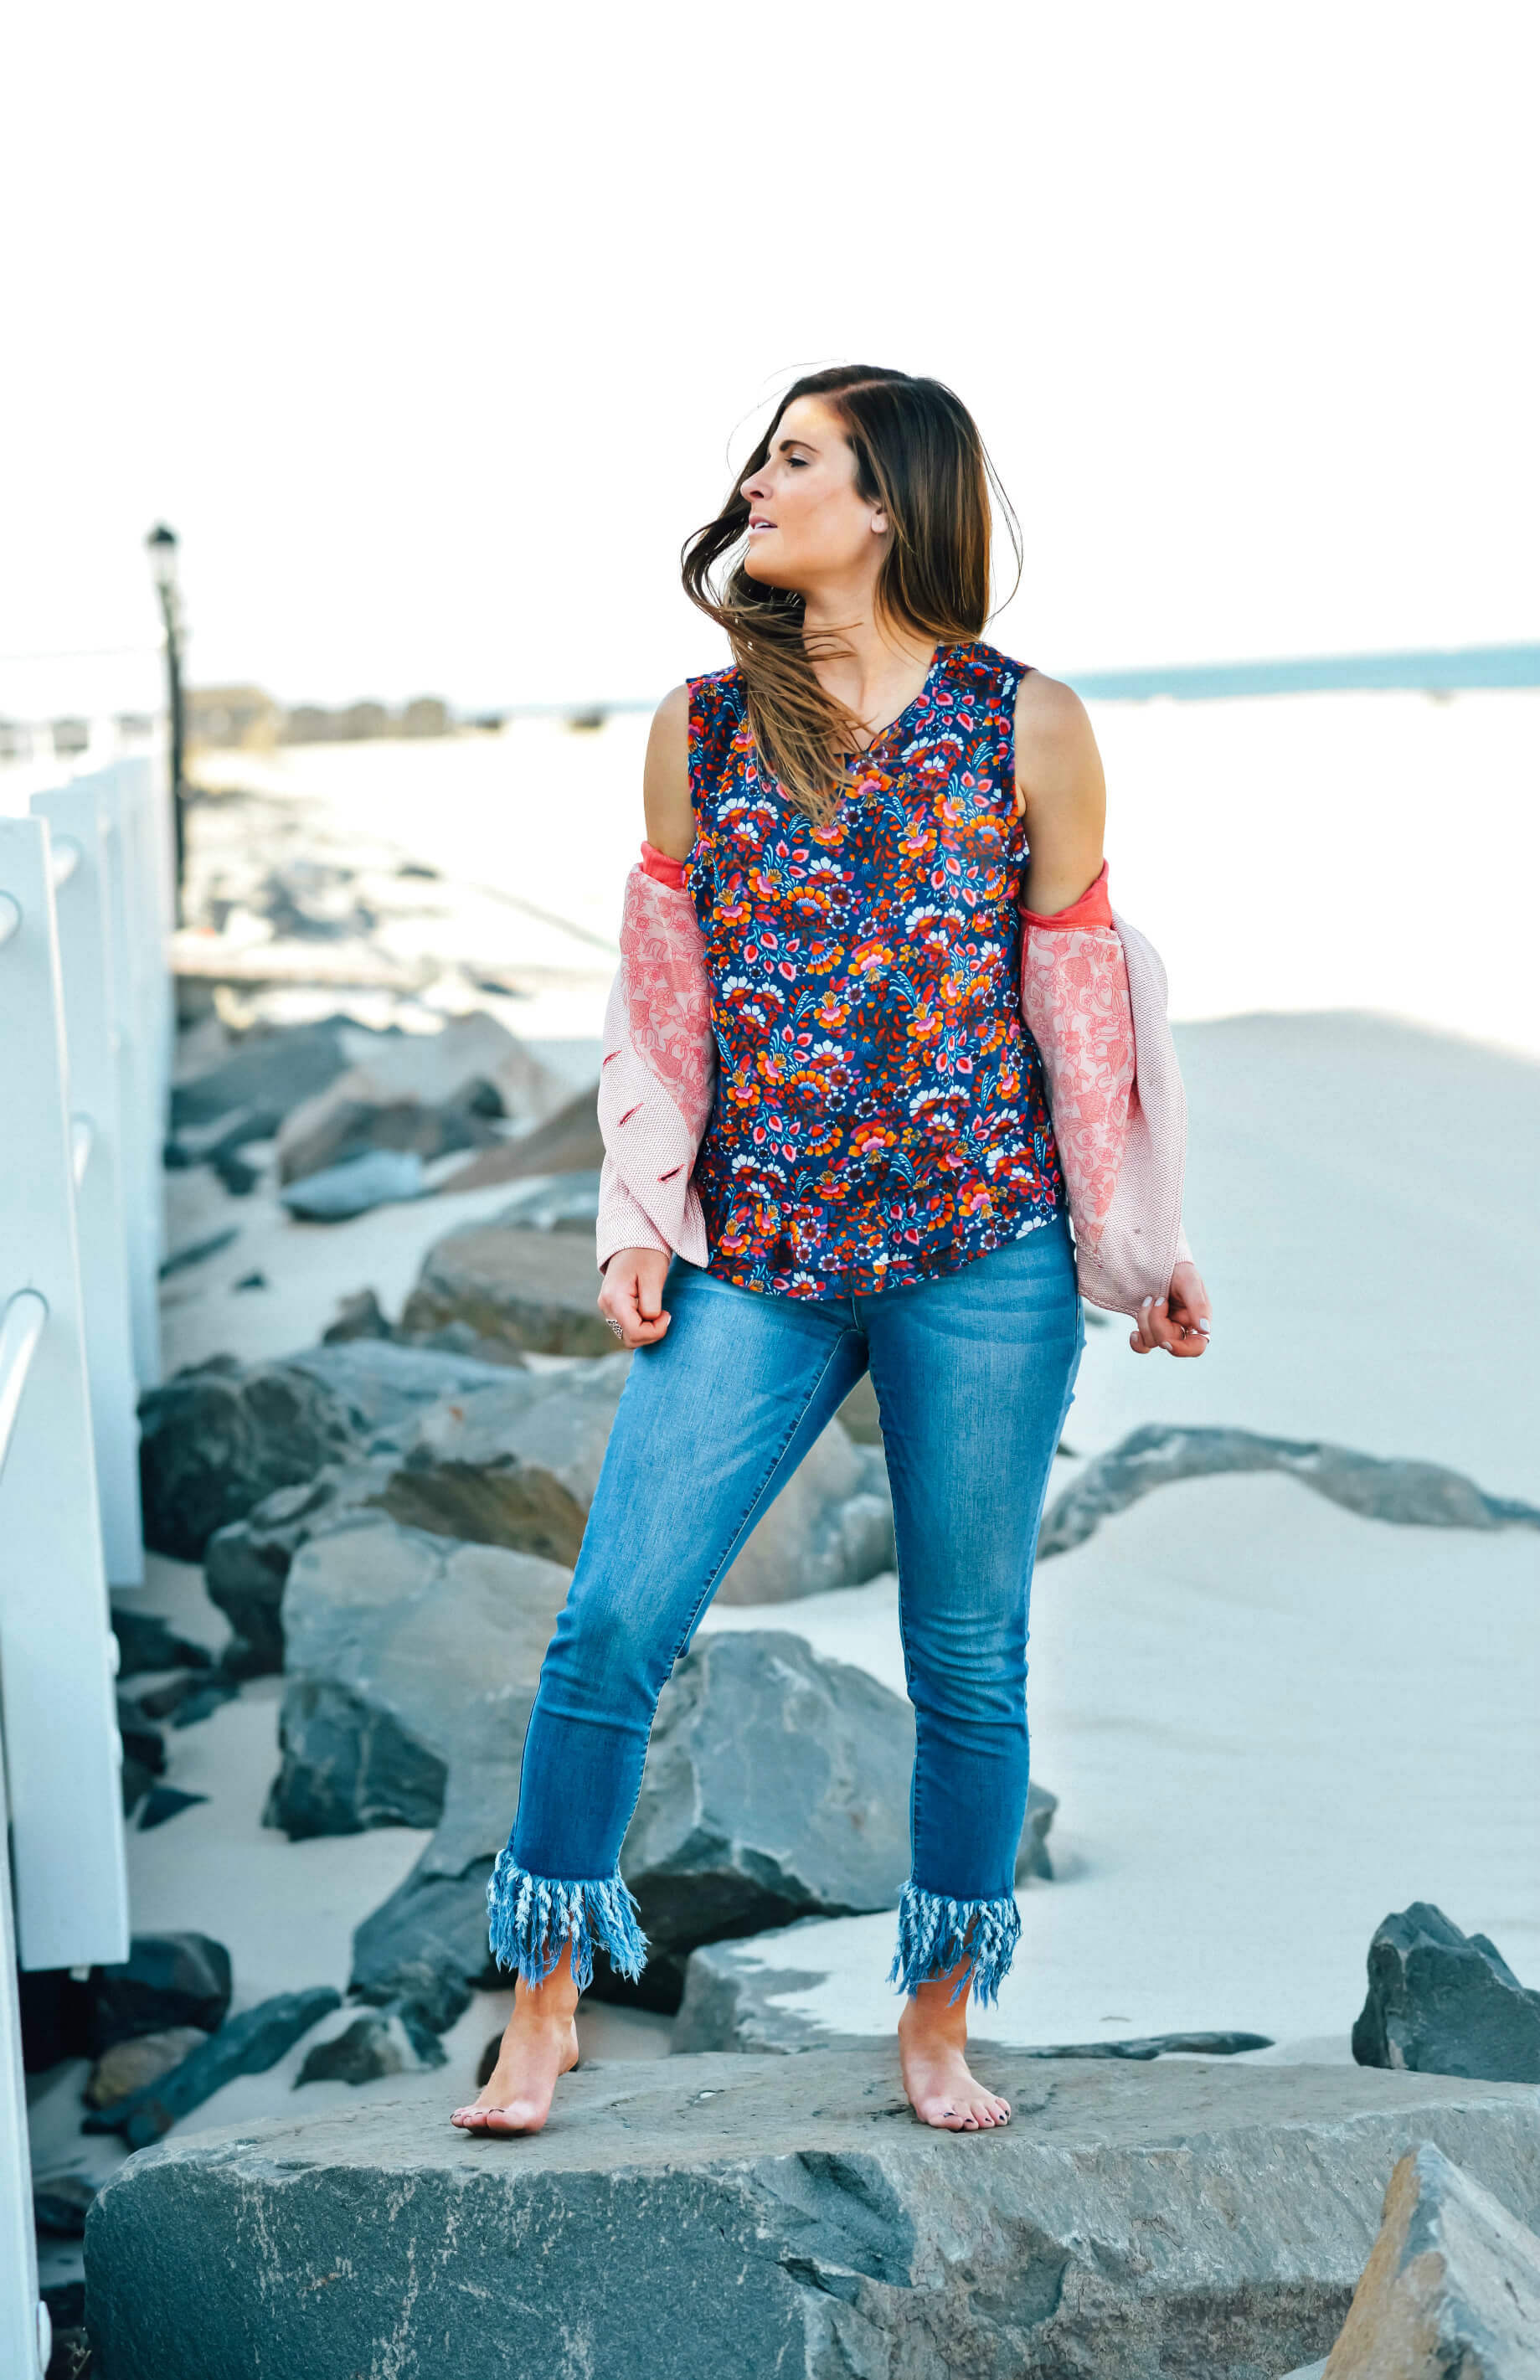 Cabi Clothing Floral Tank, Amelia Jacket, Maravilla Collection, Earl Jean Fringe Denim, Spring Style, Tilden of To Be Bright